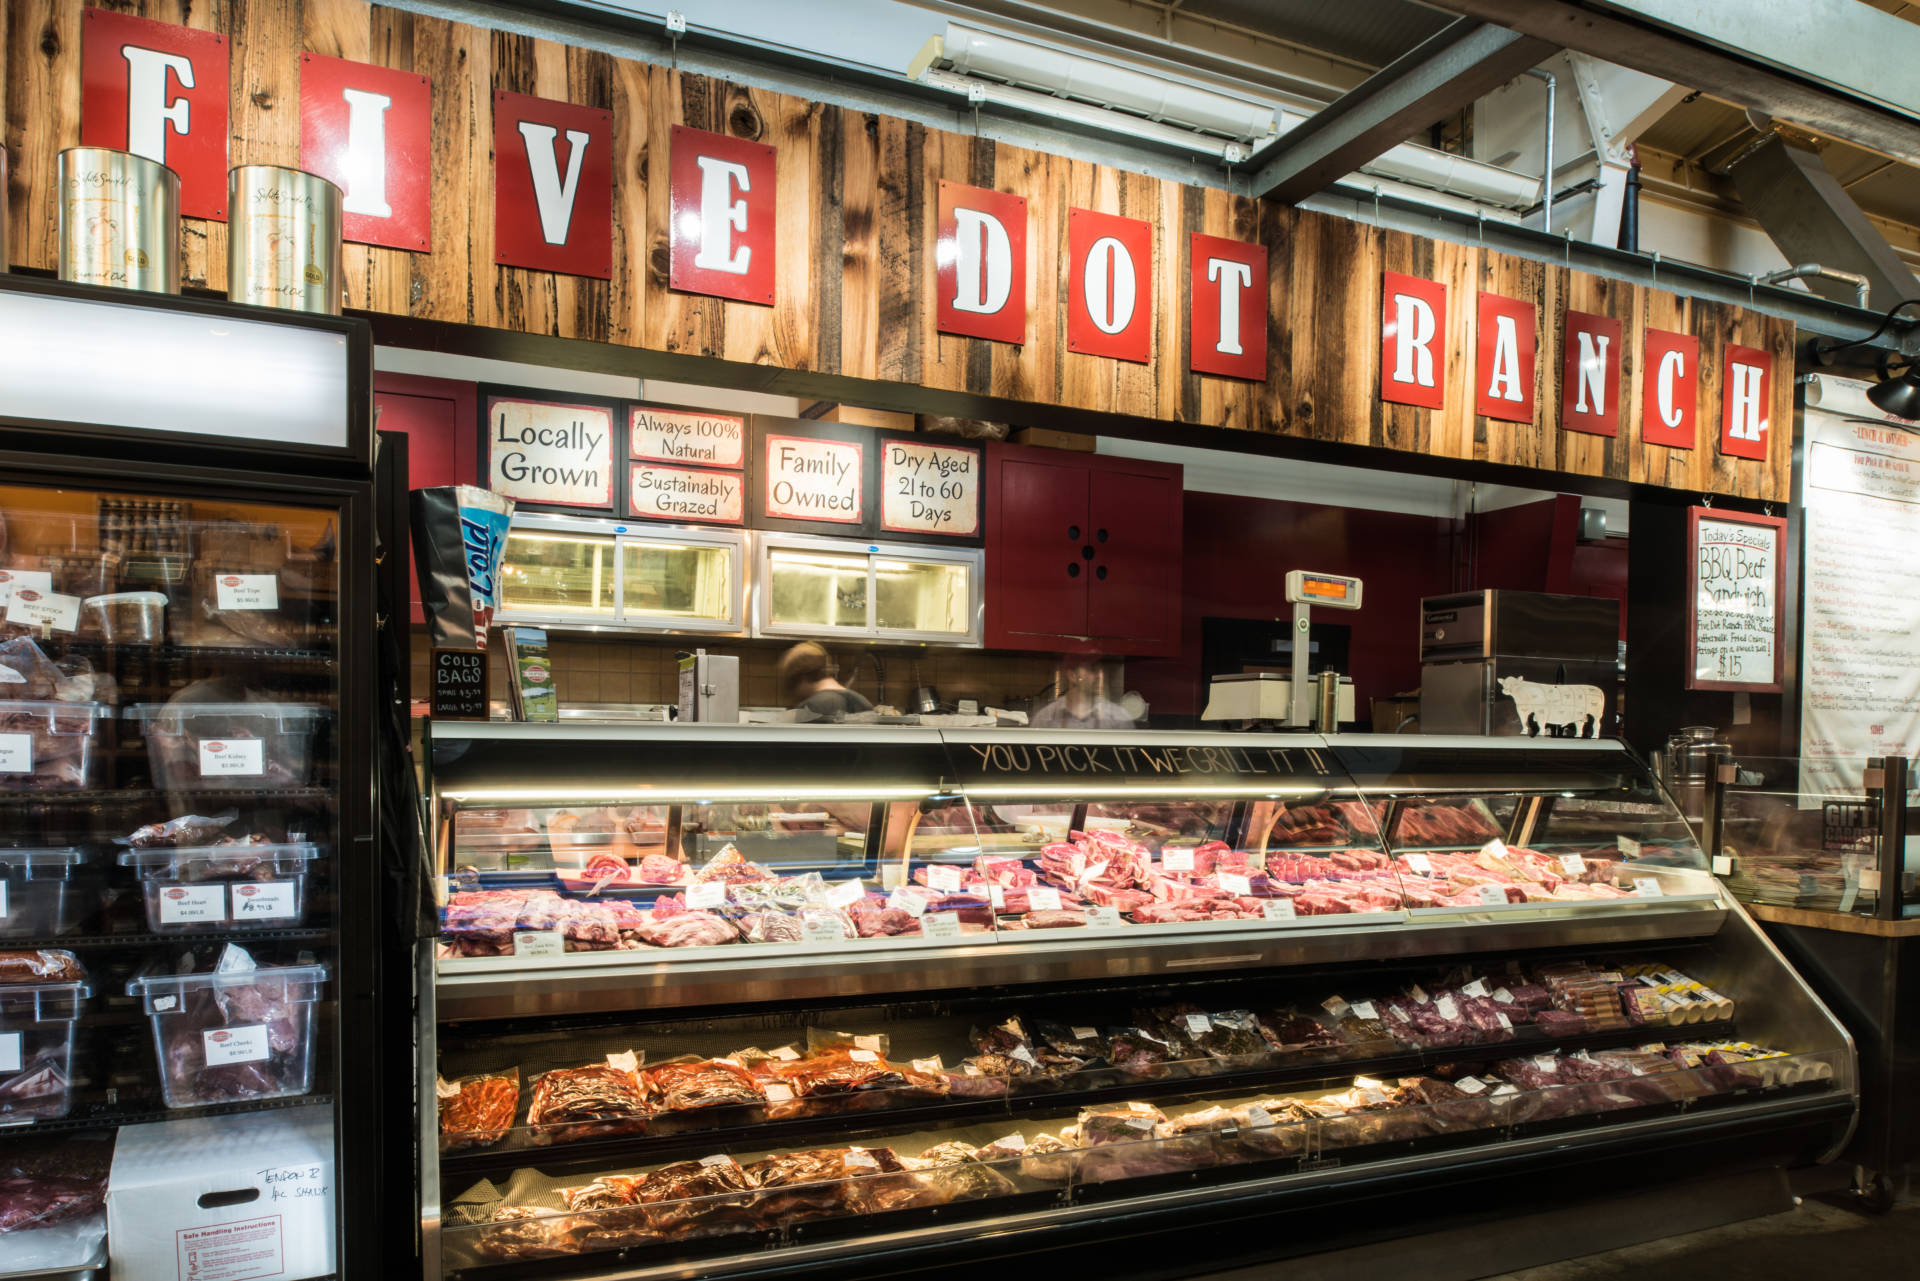 Pick your steak from the meat case and have the team grill it on site.